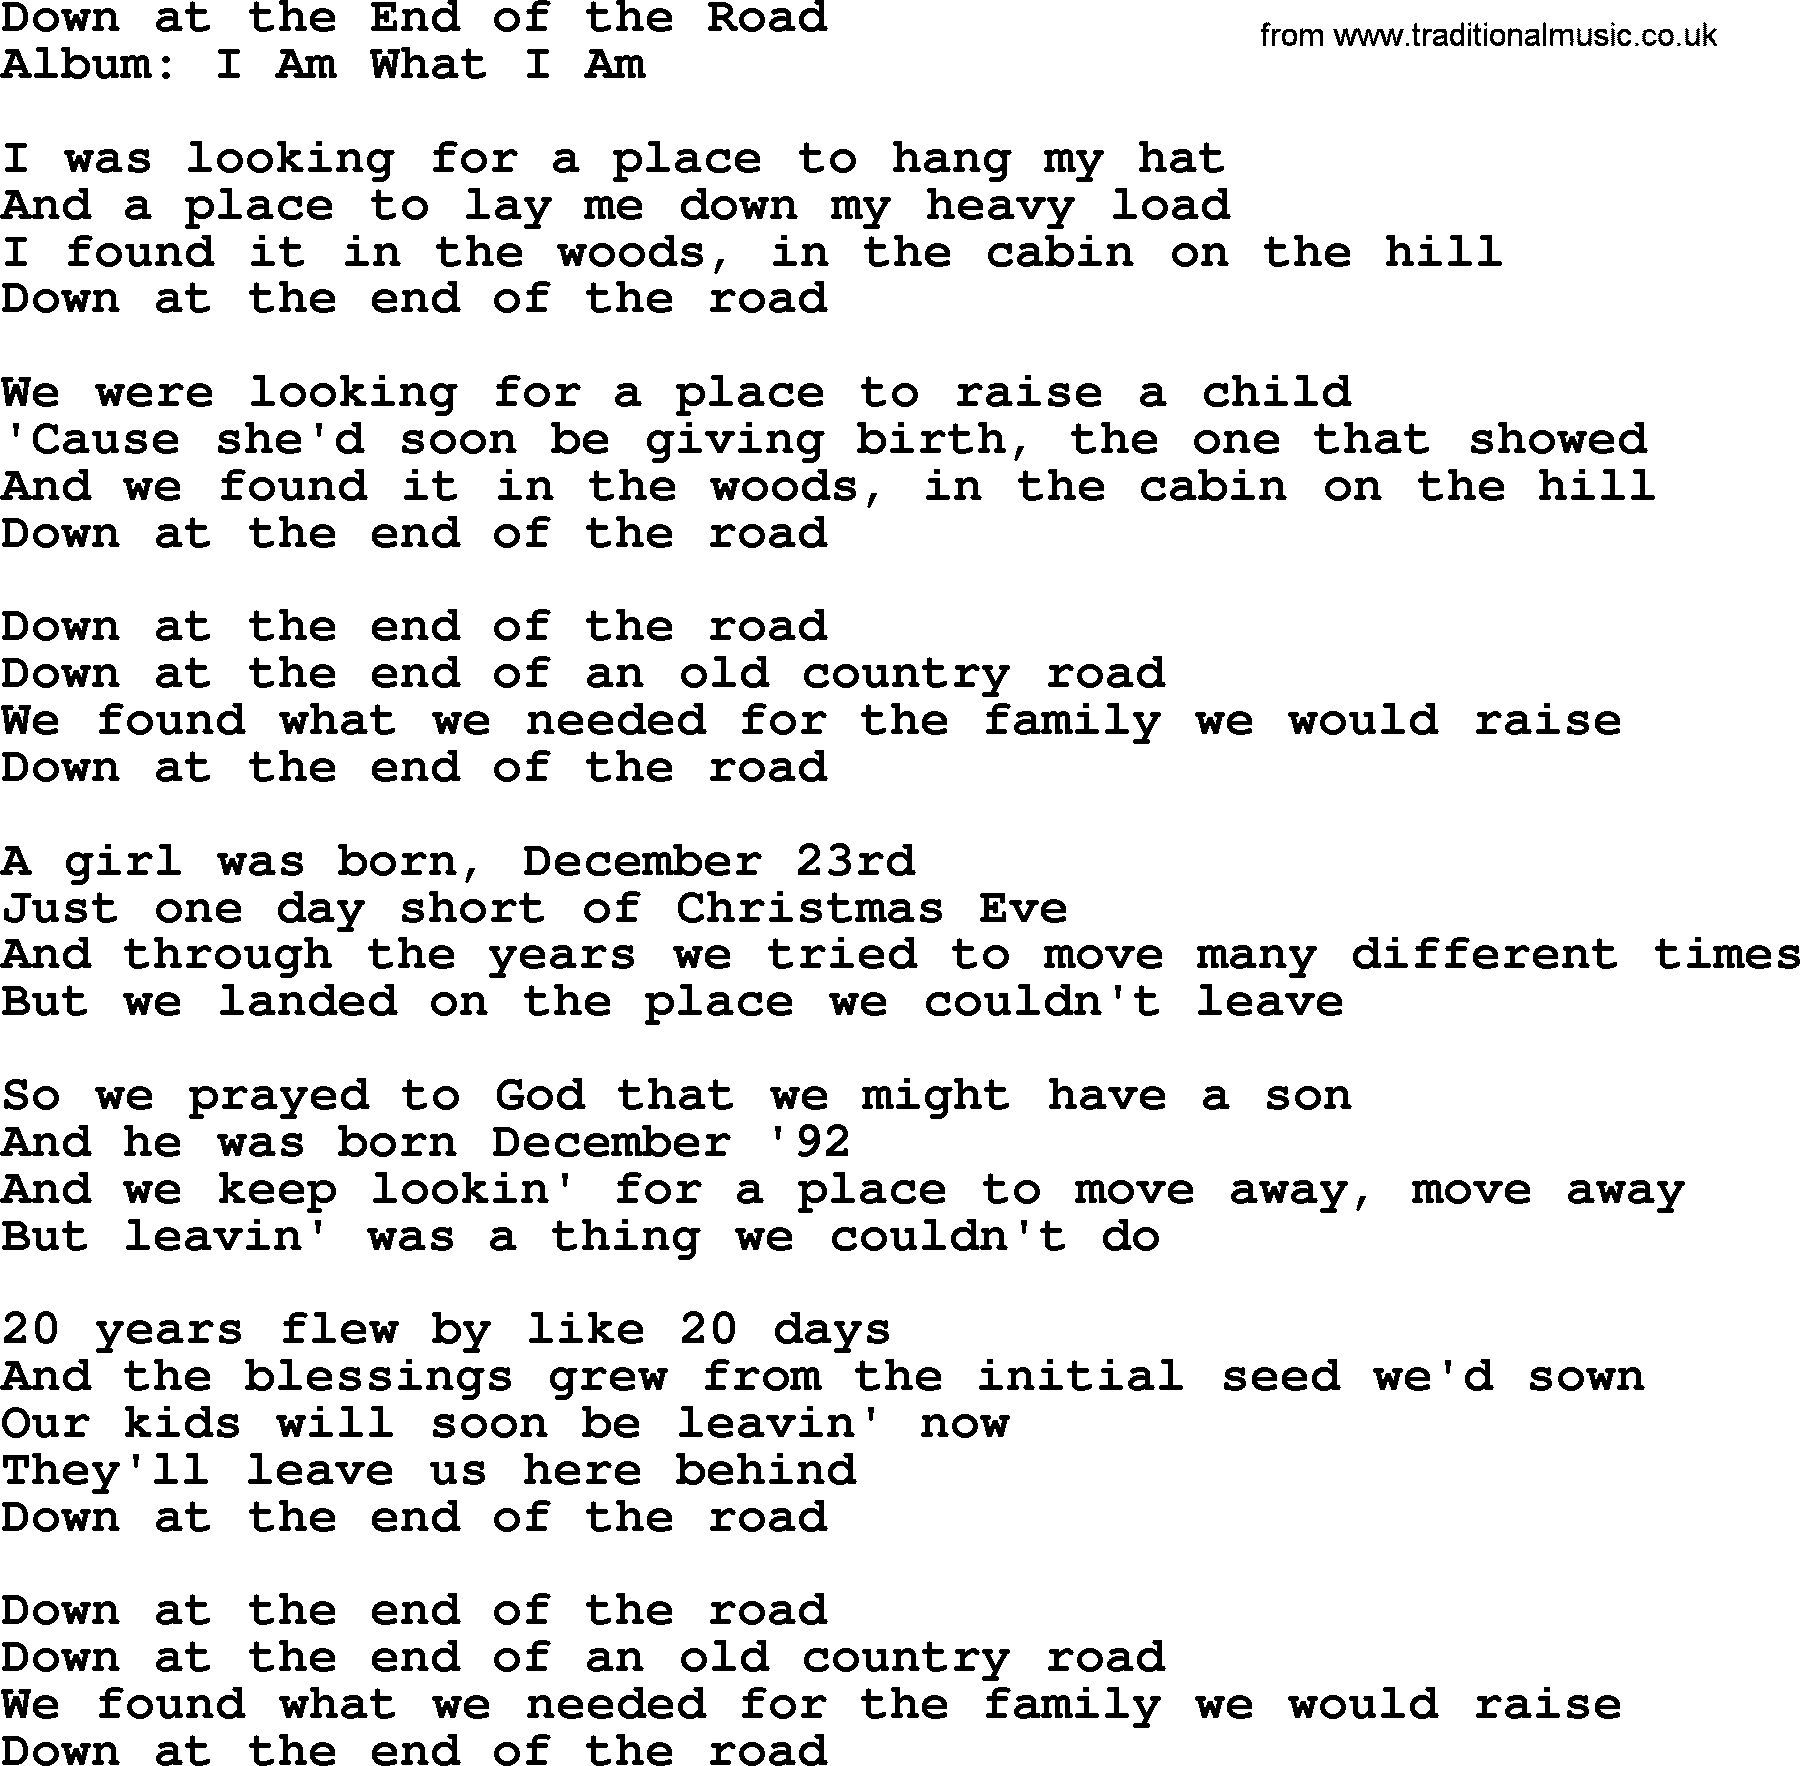 Merle Haggard song: Down At The End Of The Road, lyrics.